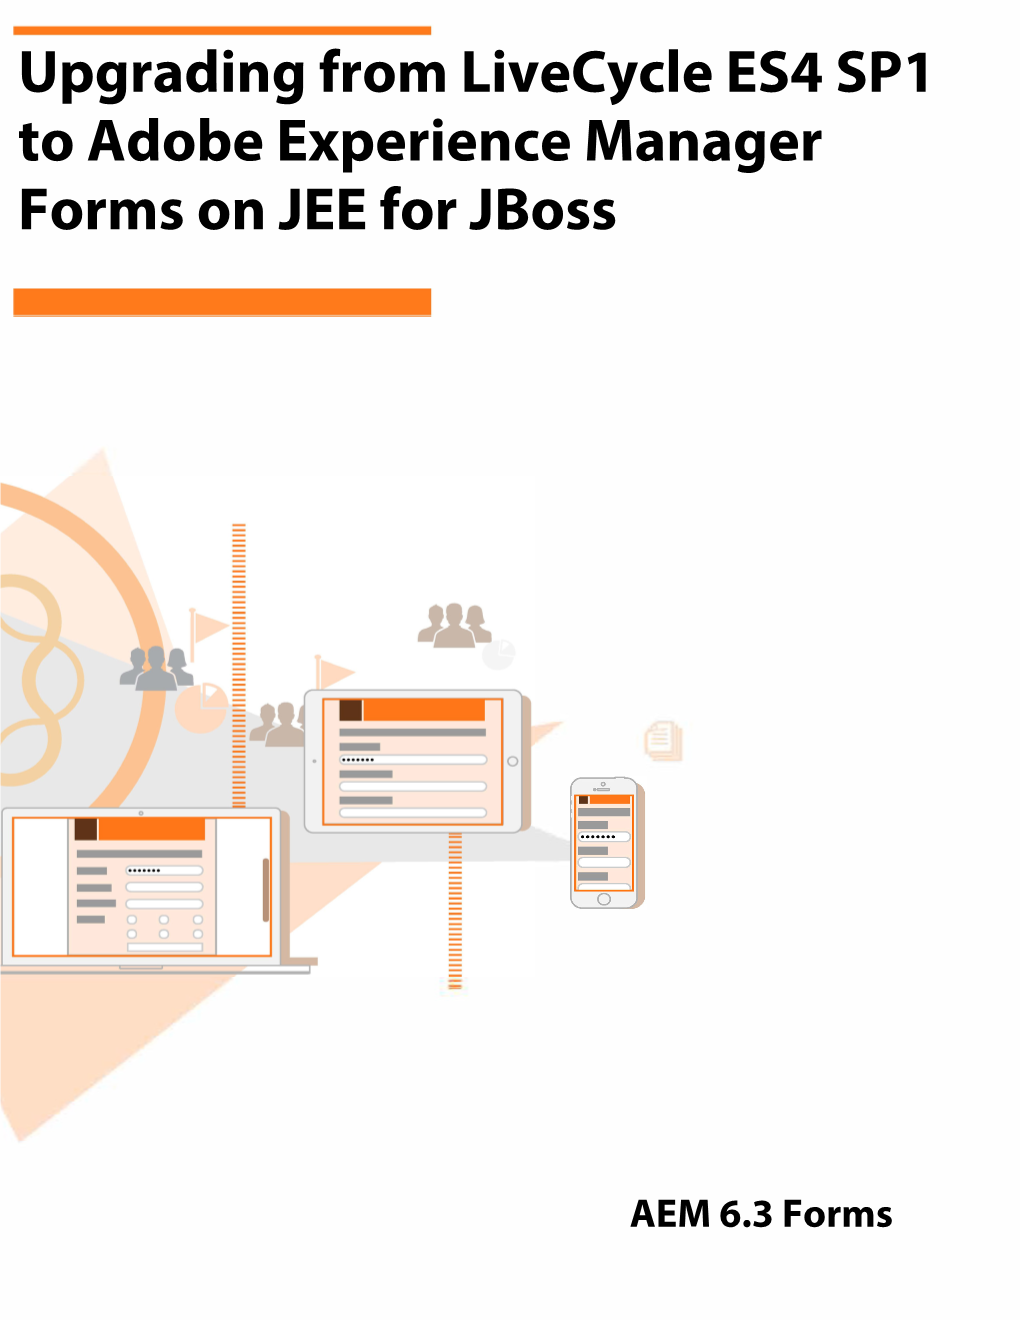 Upgrading from Livecycle ES4 SP1 to Adobe Experience Manager Forms on JEE for Jboss